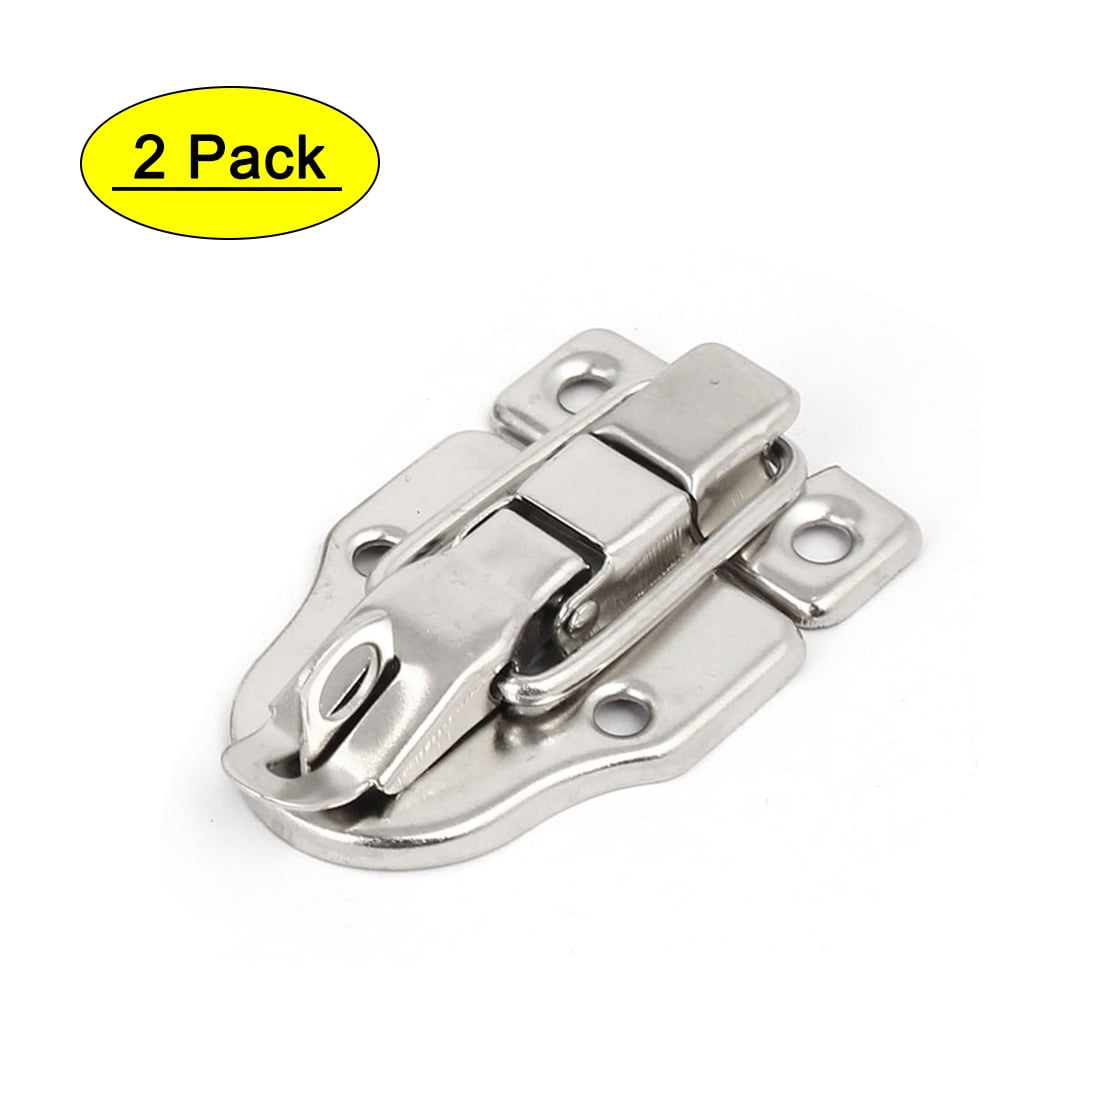 Flyshop Hardware Cabinet Boxes Spring Loaded Latch Catch Toggle Hasp Stainless Steel Lock 4 Set #106 